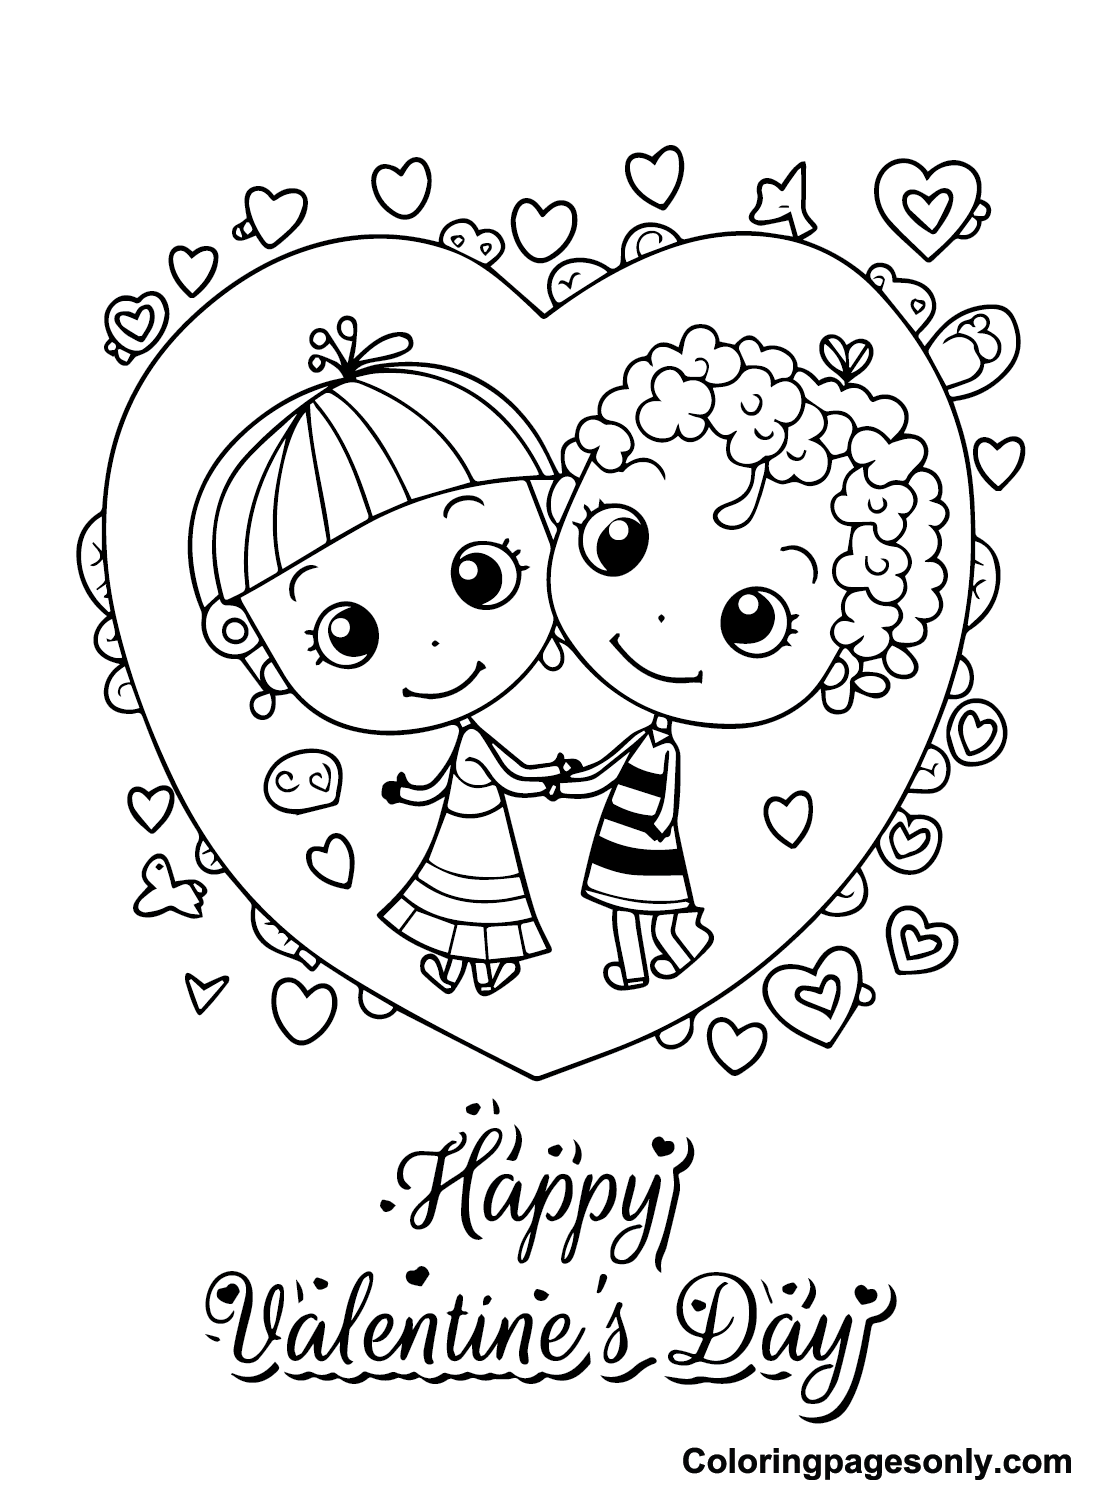 Valentines Day Cards Images Coloring Pages